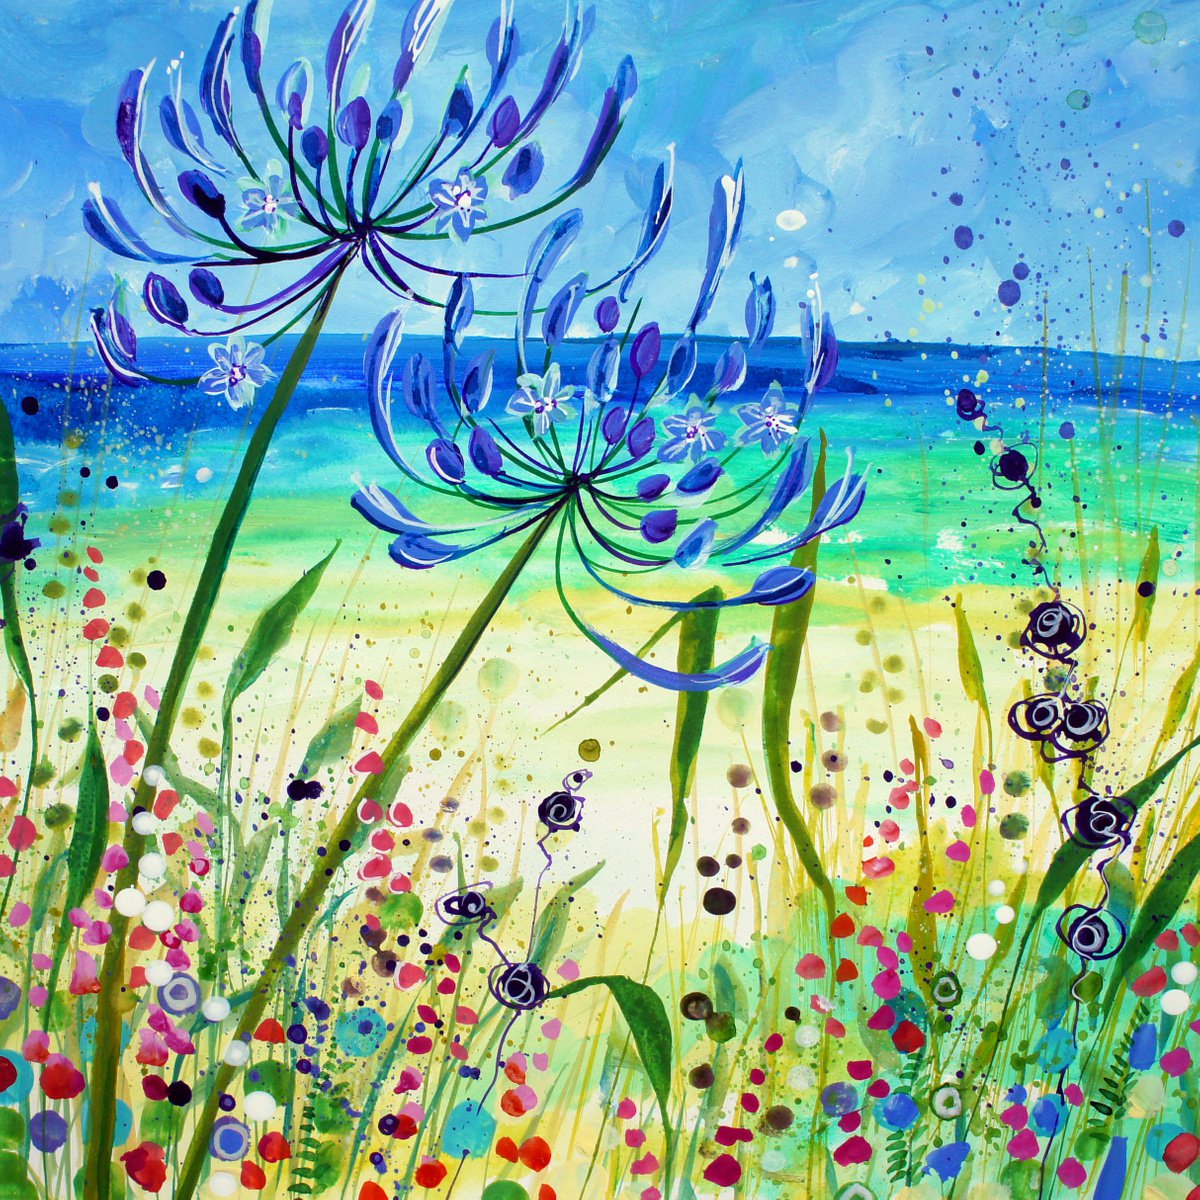 Beach Blooms - Agapanthus at the Coast by Julia Rigby